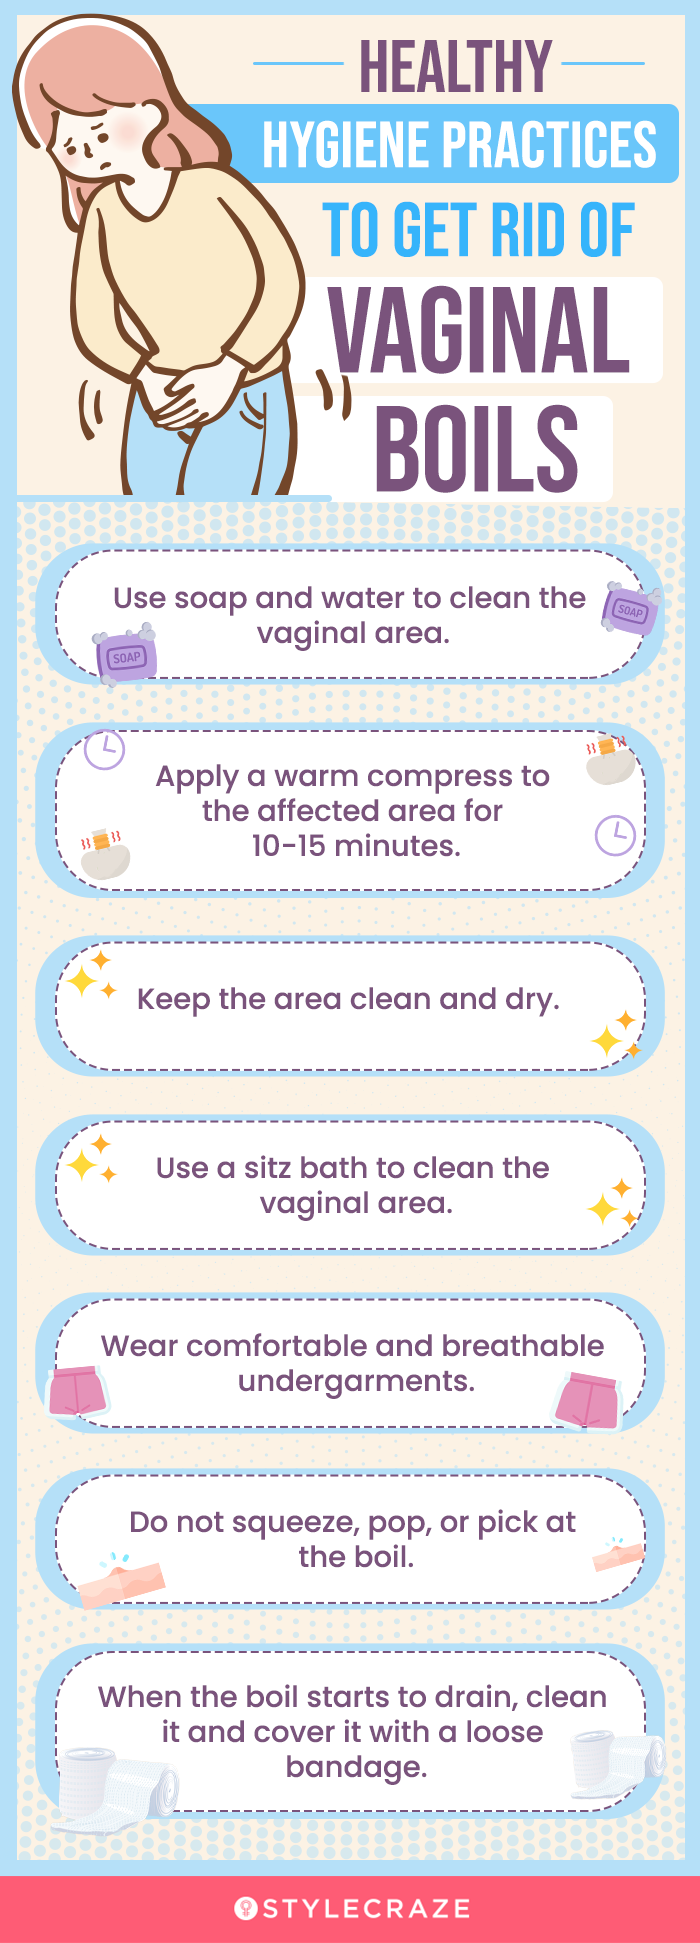 try these top homemade conditioners for curly hair (infographic)